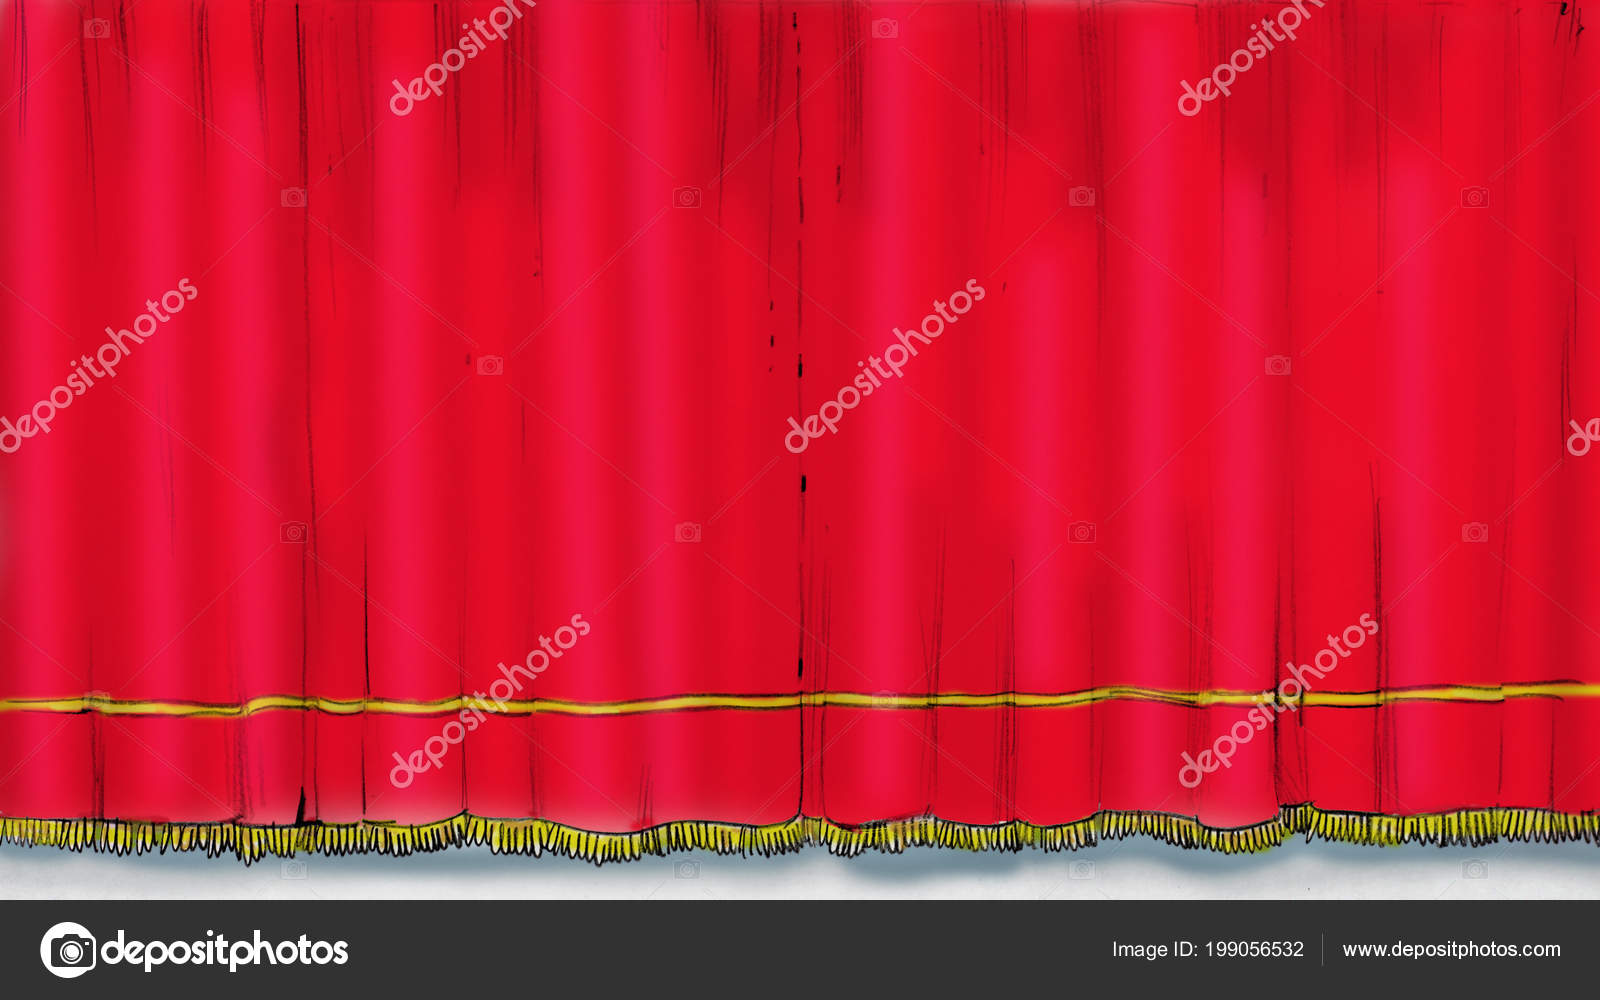 Cartoon Style Illustration Red Theater Curtains Stock Photo by ©marcovarro  199056532